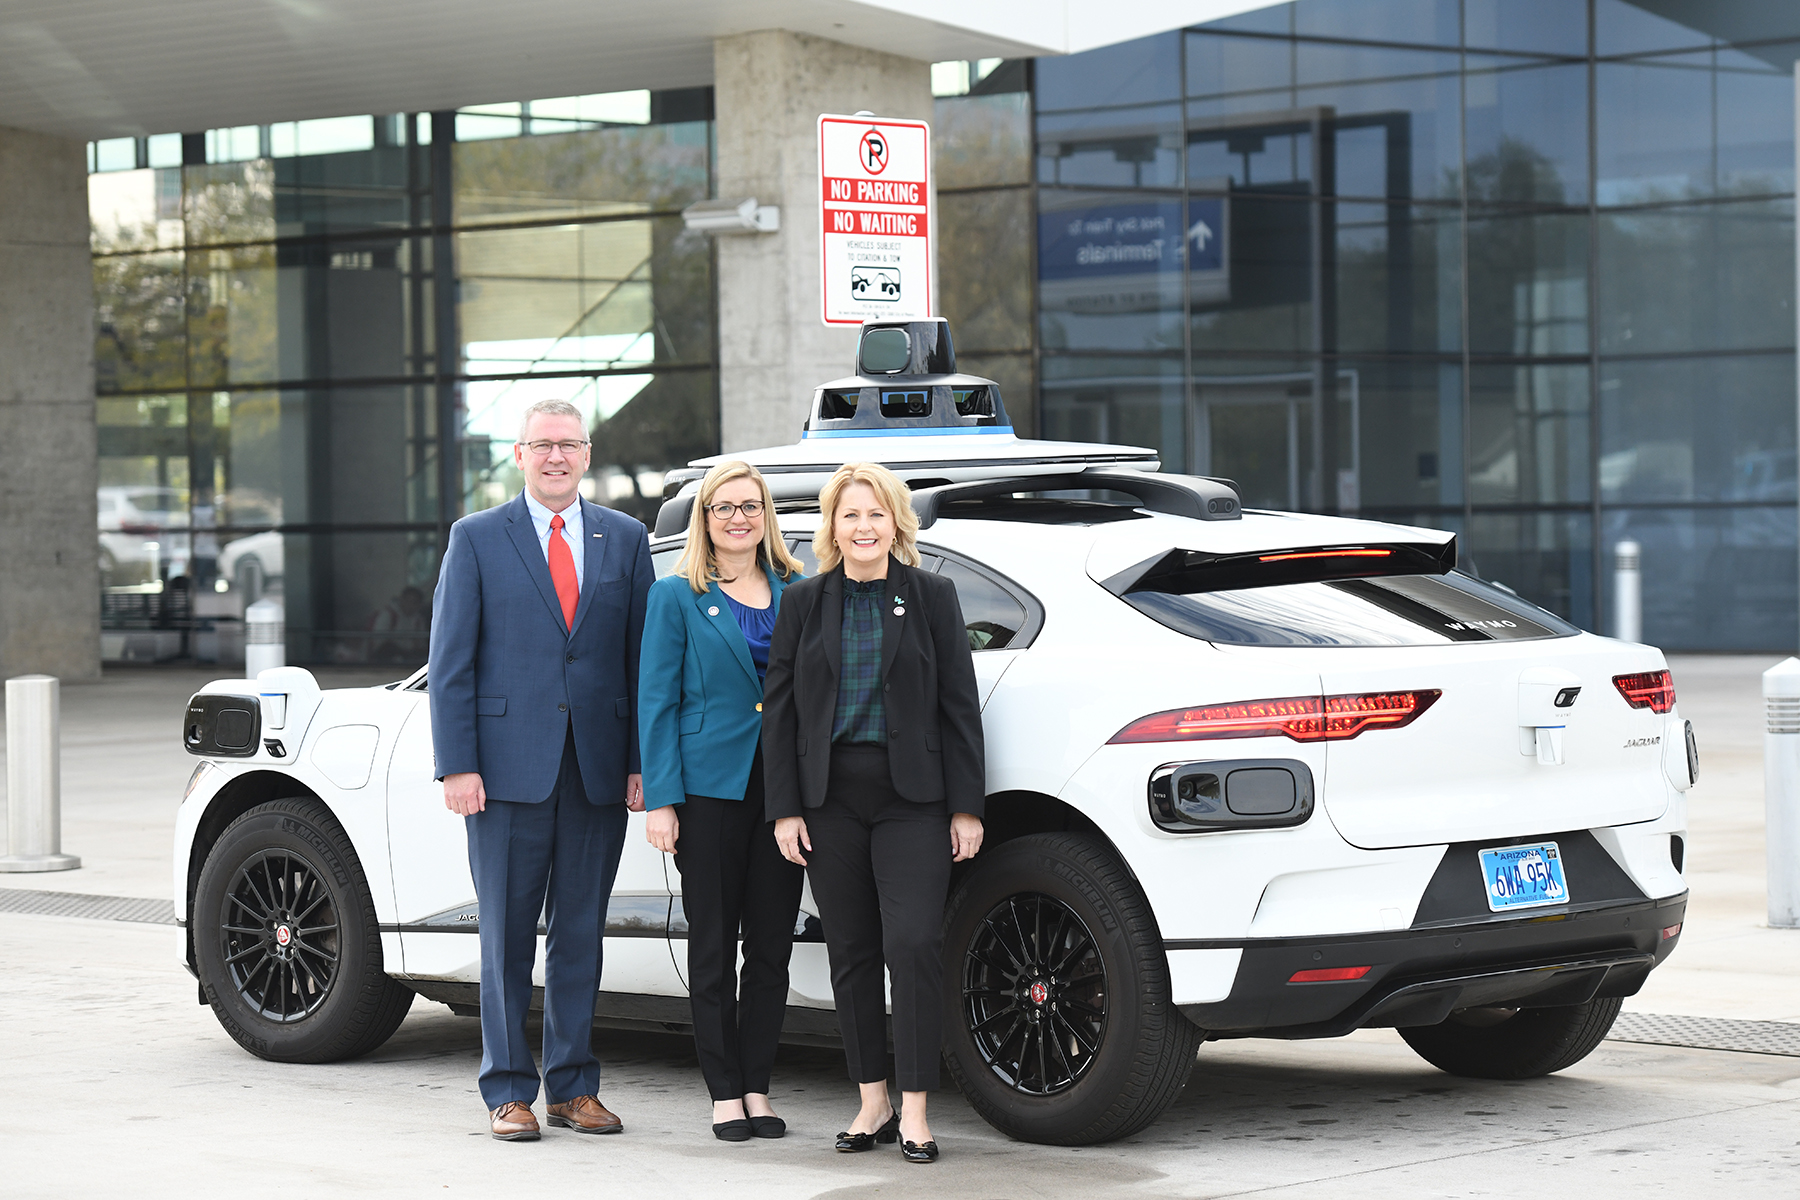 Vips standing in front of a Waymo car